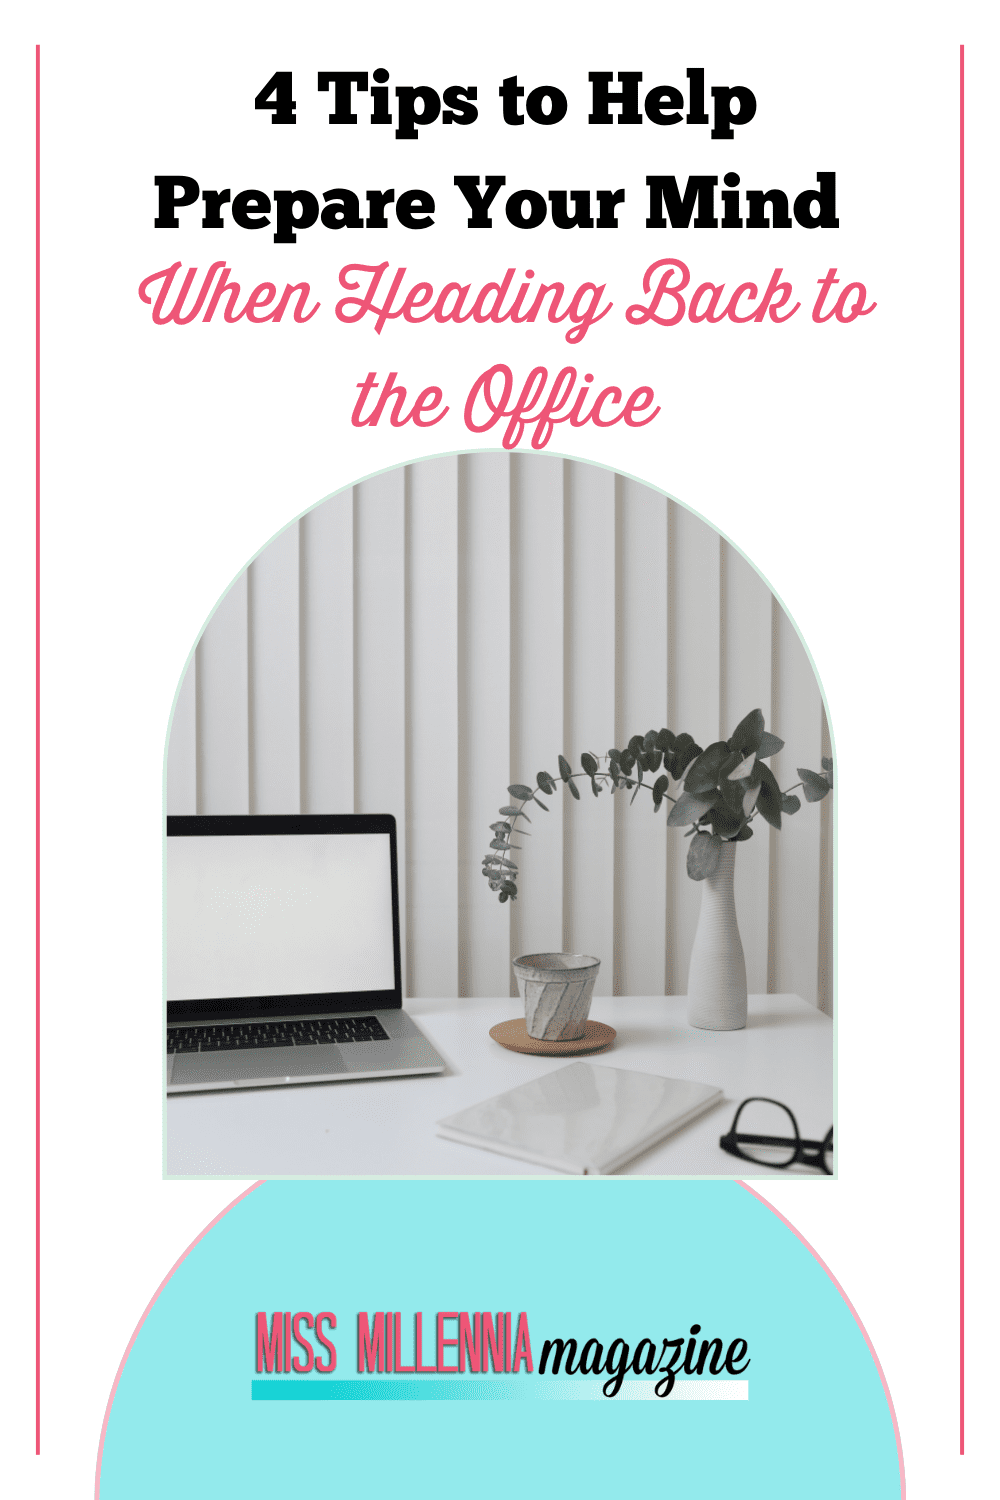 4 Tips to Help Prepare Your Mind When Heading Back to the Office